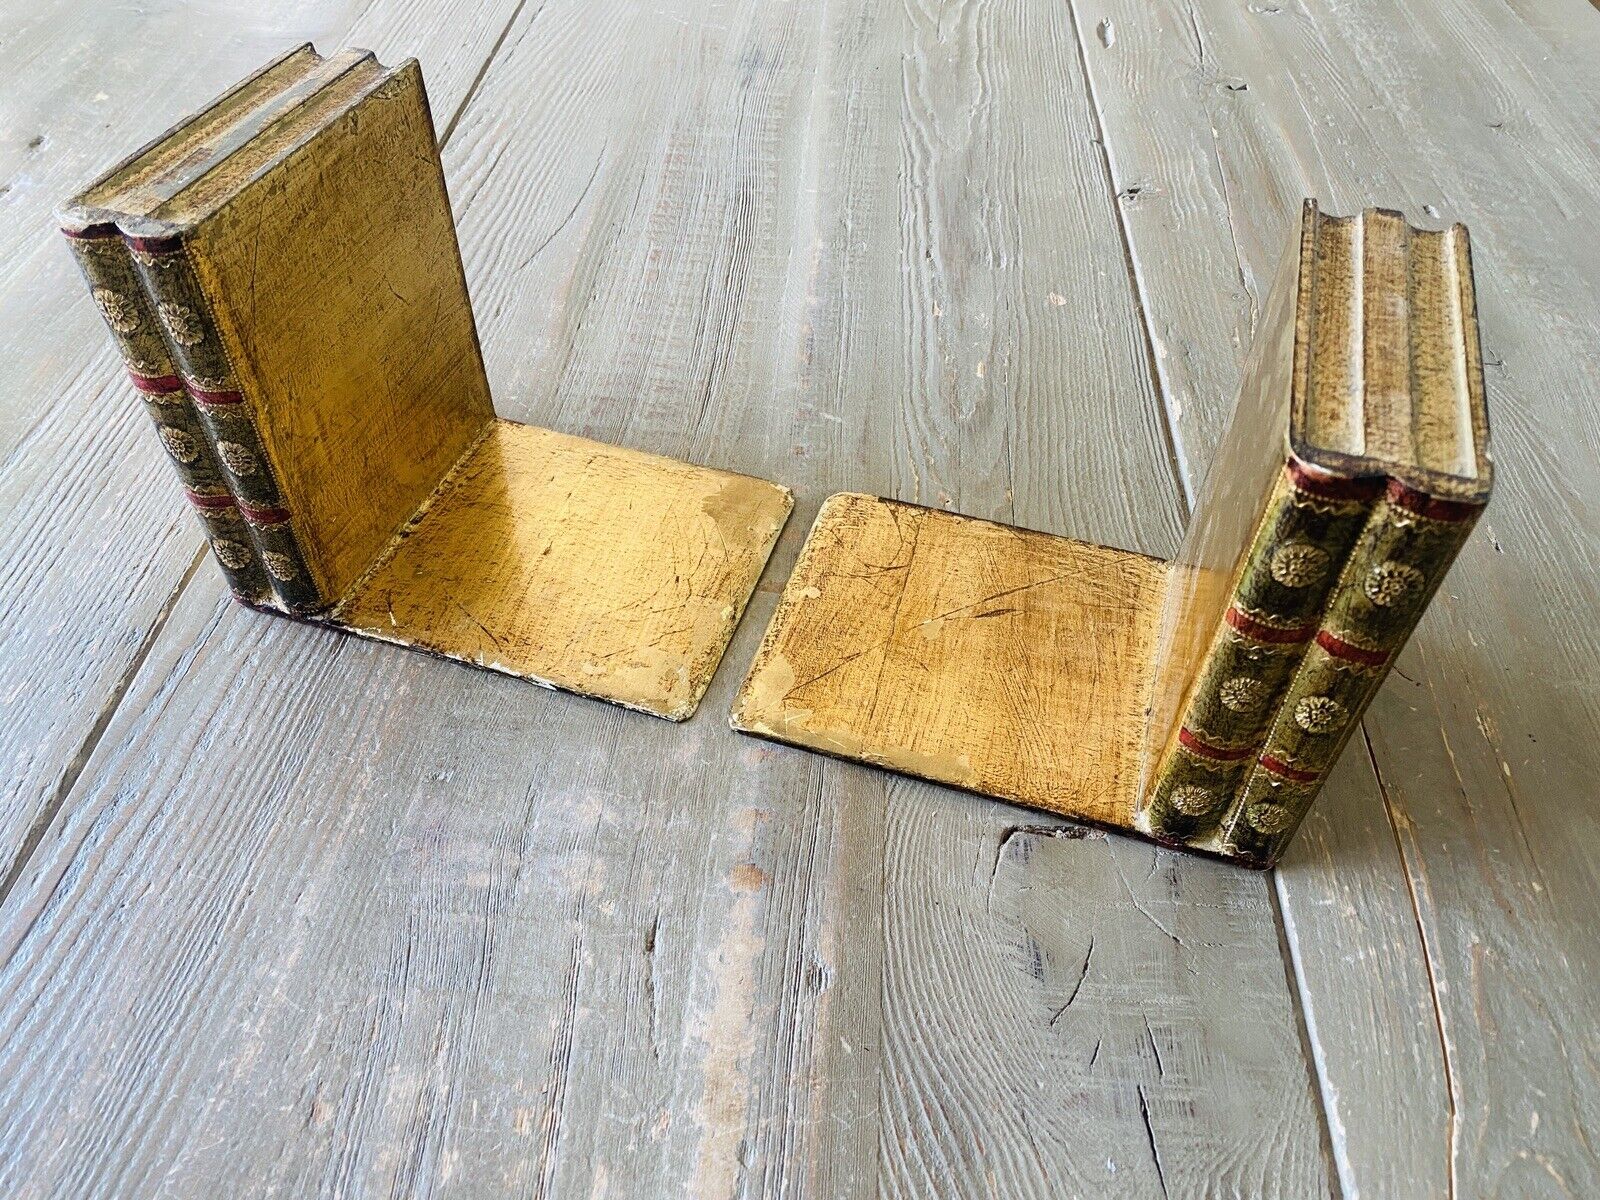 Vtg Florentia Italy Italian Florentine Bookends Stacked Books Gilt Wood 1960s